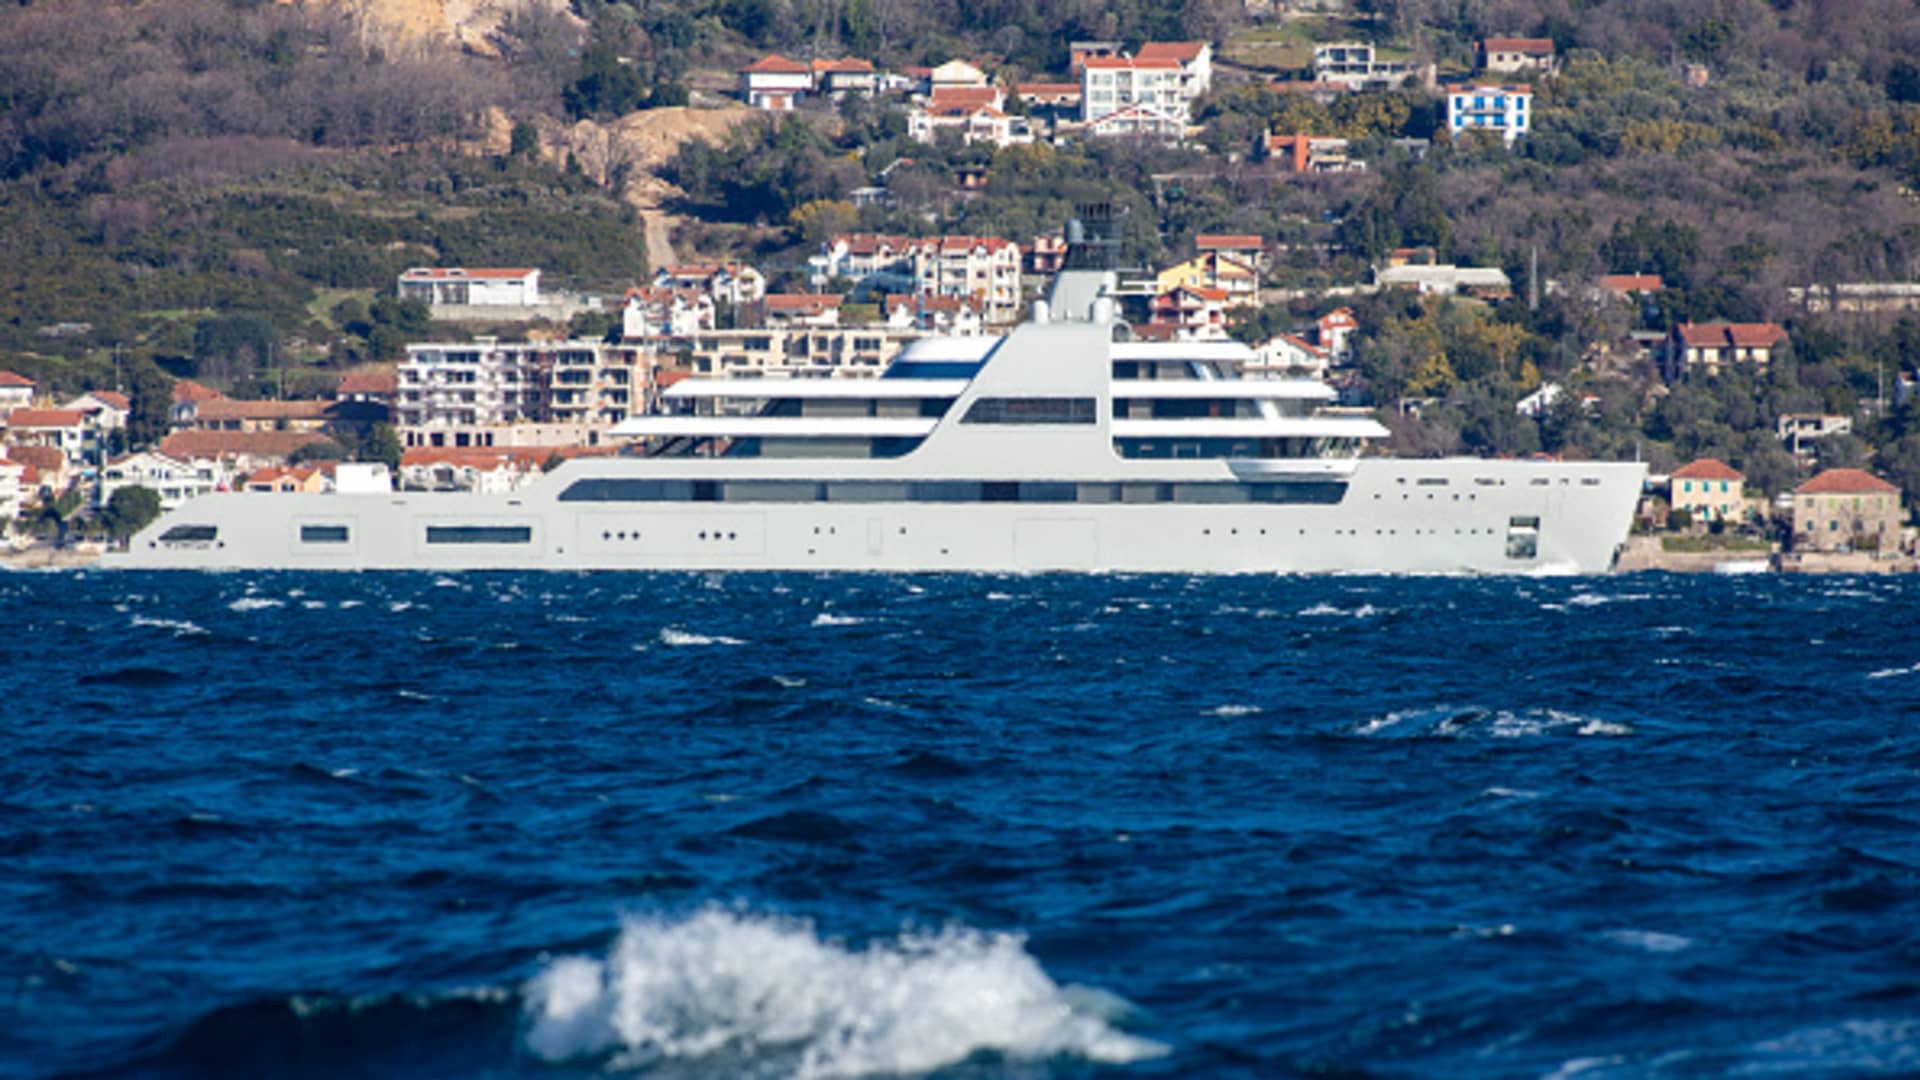 The superyacht, Solaris, owned by Roman Abramovich, seen in the waters of Porto Montenegro on March 12, 2022 in Tivat, Montenegro, before later relocating to Bodrum, Turkey.